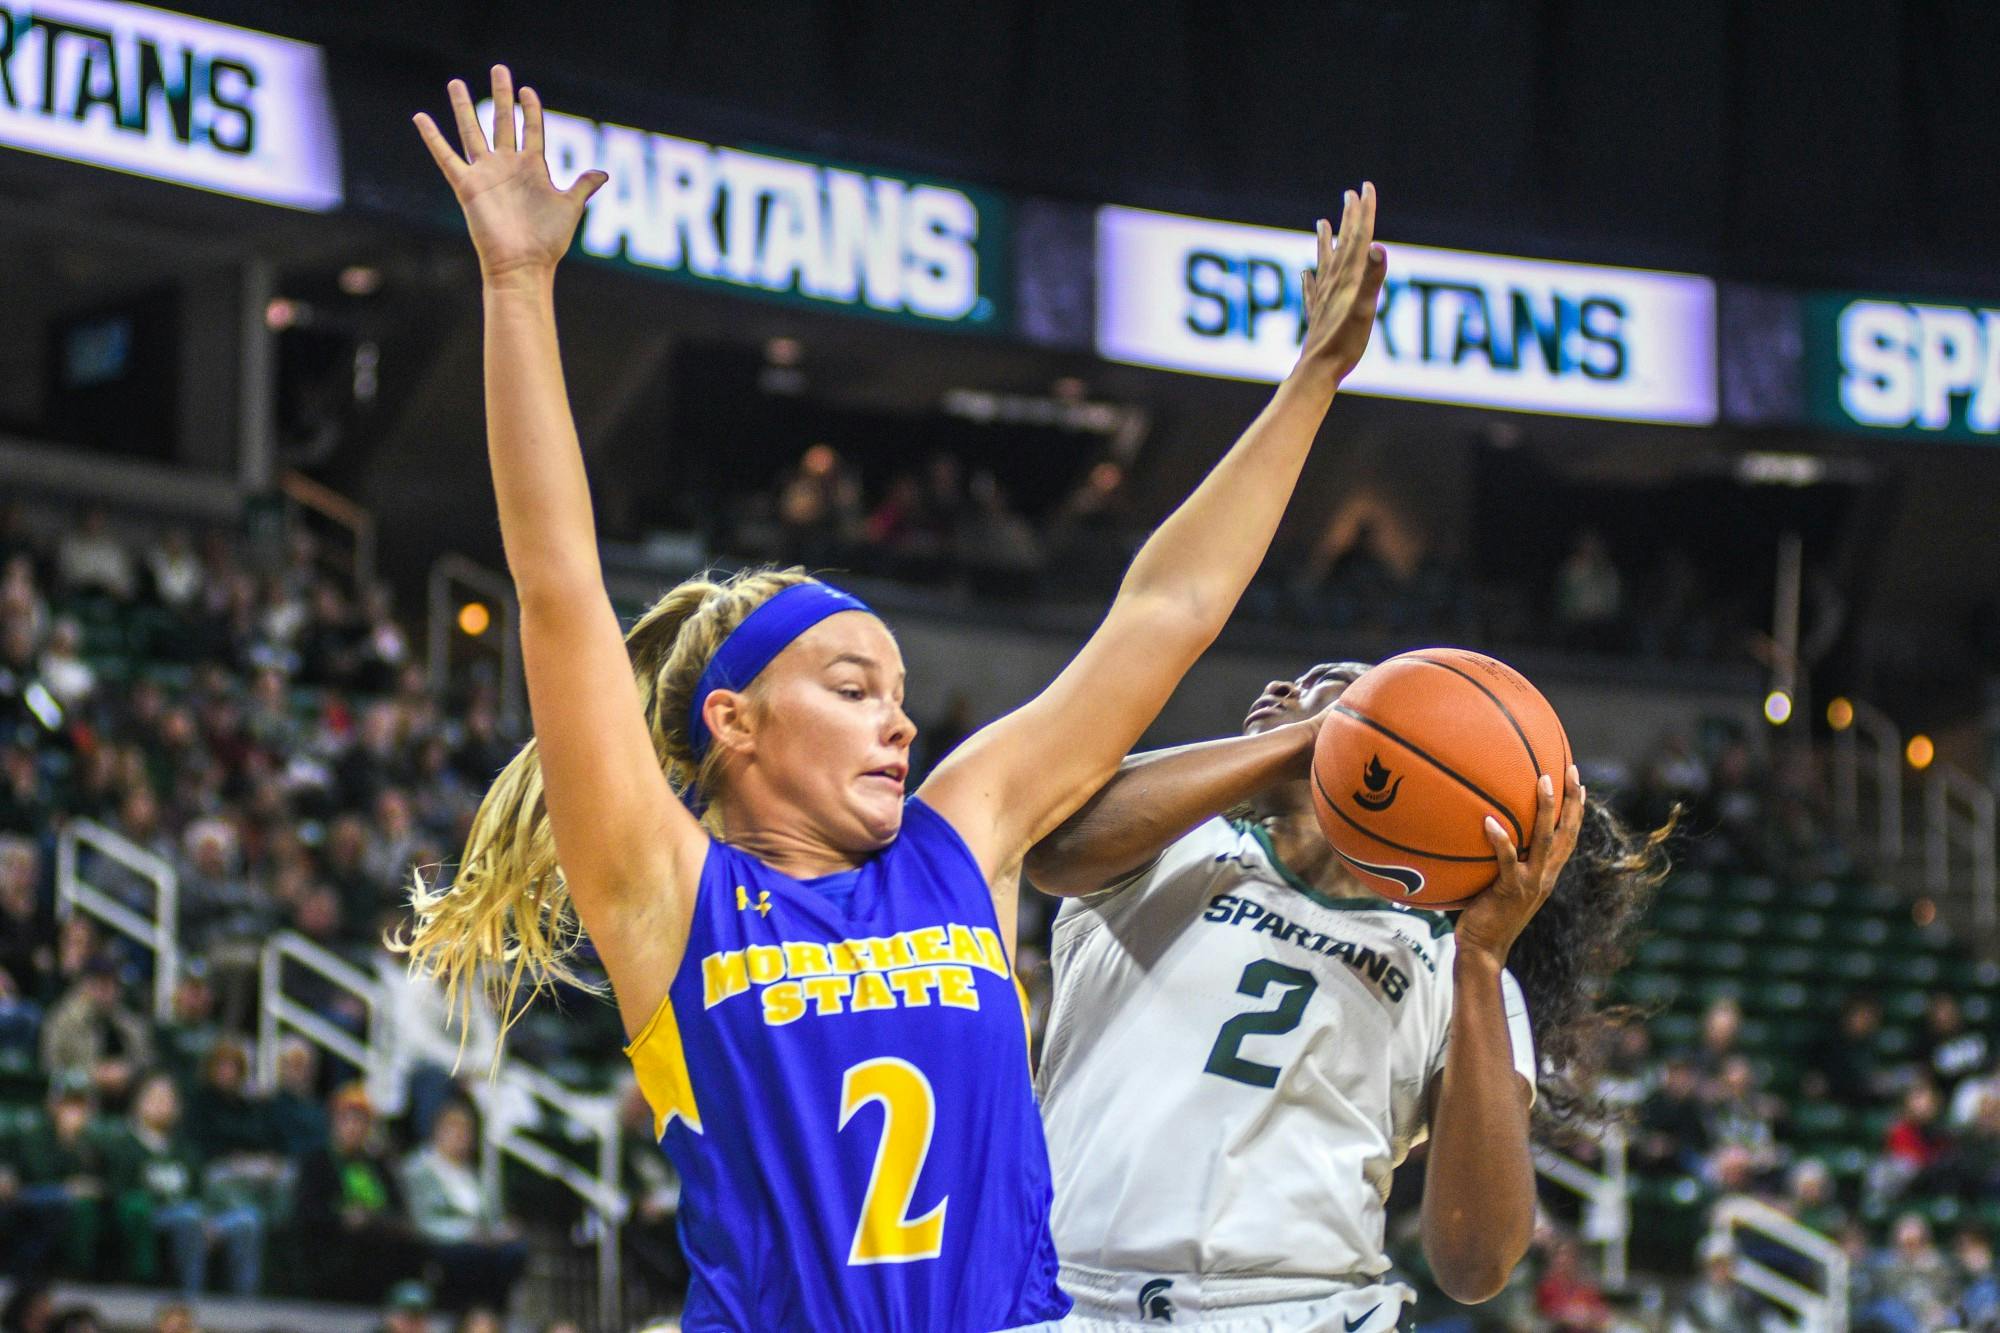 Redshirt sophomore forward Mardrekia Cook (2) shoots the ball during the game against Morehead State at Breslin Center on Dec. 15, 2019. The Spartans defeated the Eagles, 93-48.